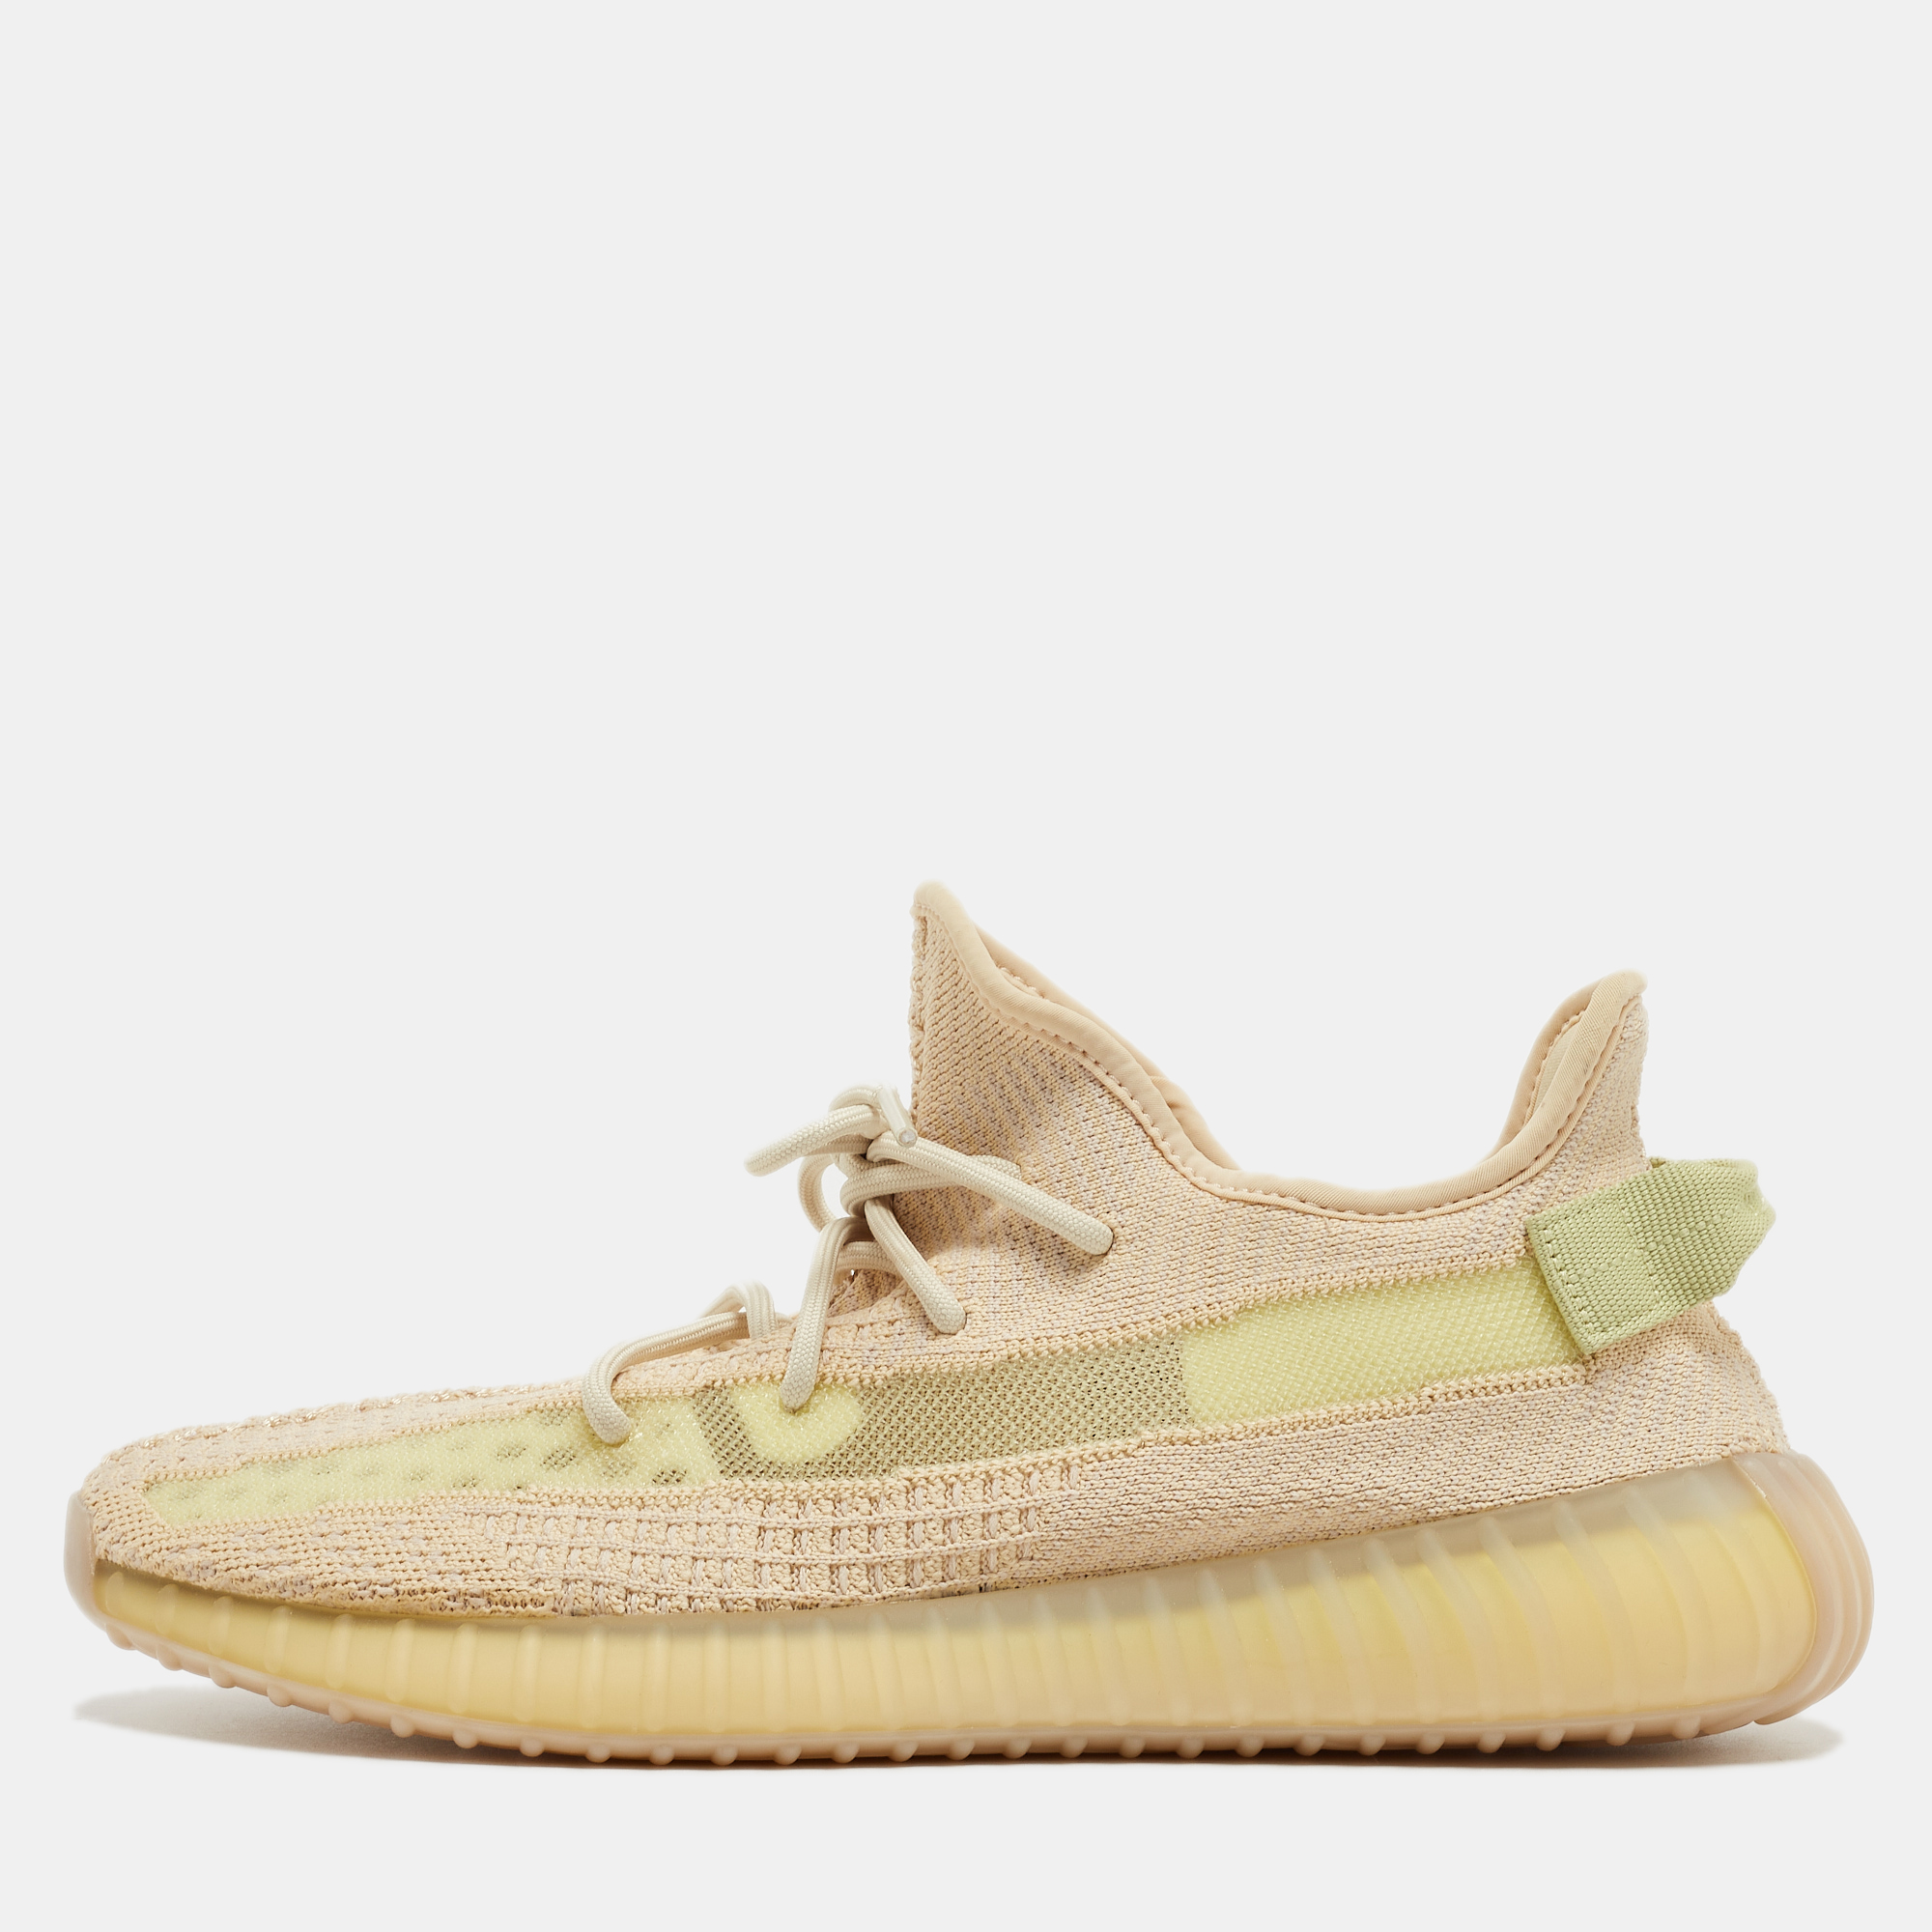 

Yeezy x Adidas Beige Knit Boost 350 V2 Sneakers Size